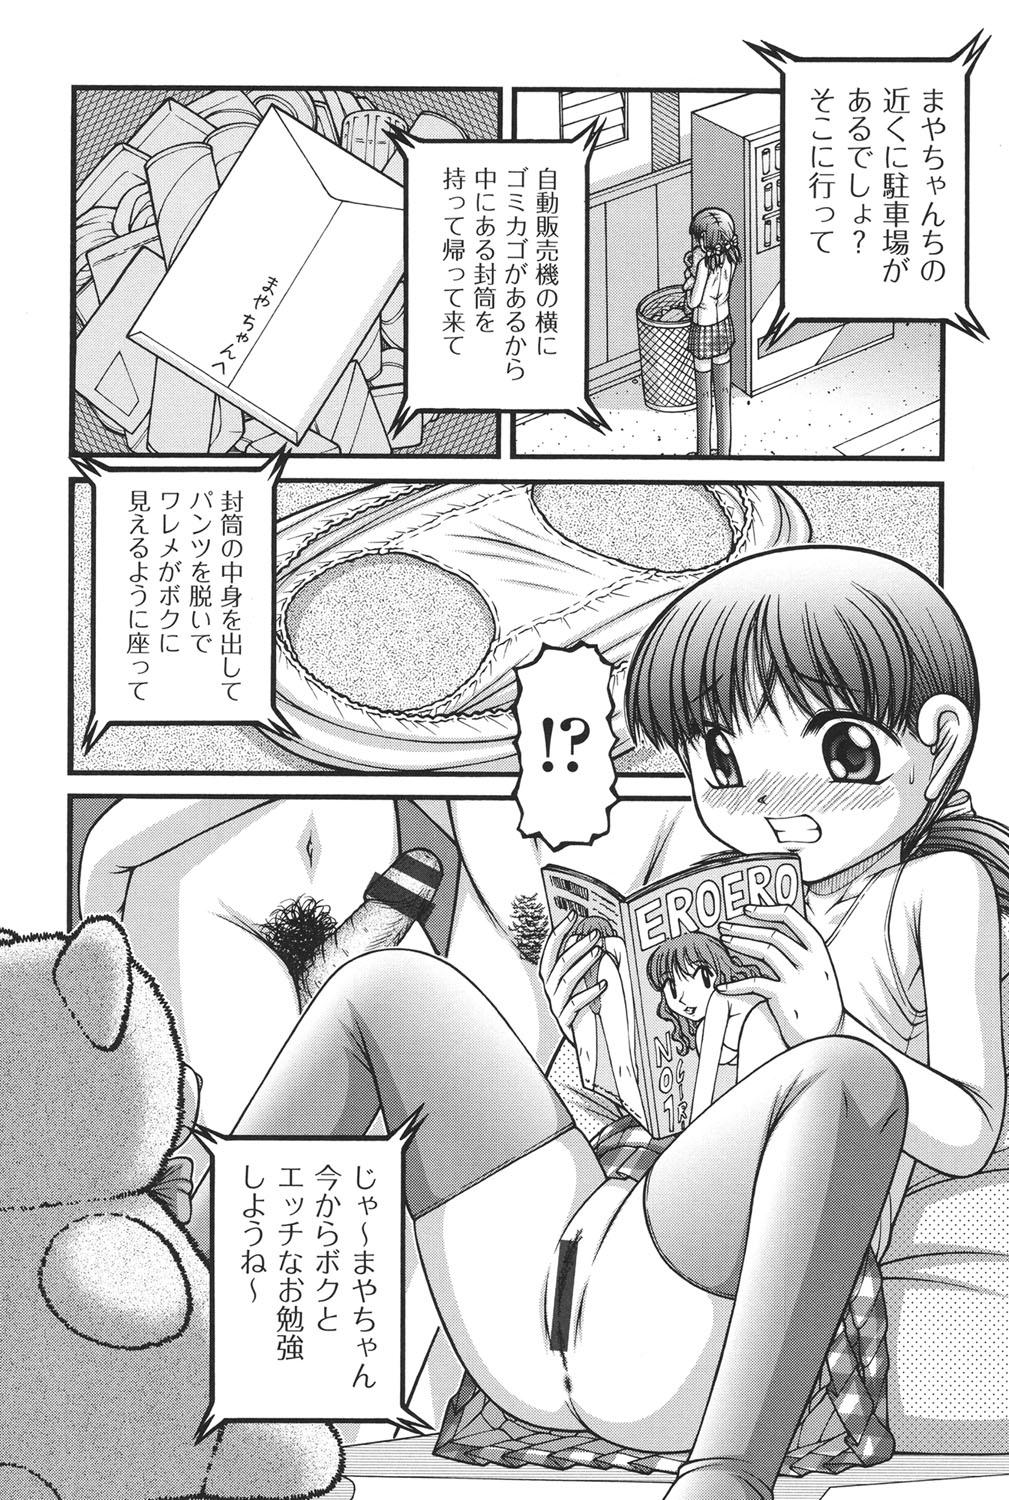 Sesso Otona no Omocha Young Old - Page 10